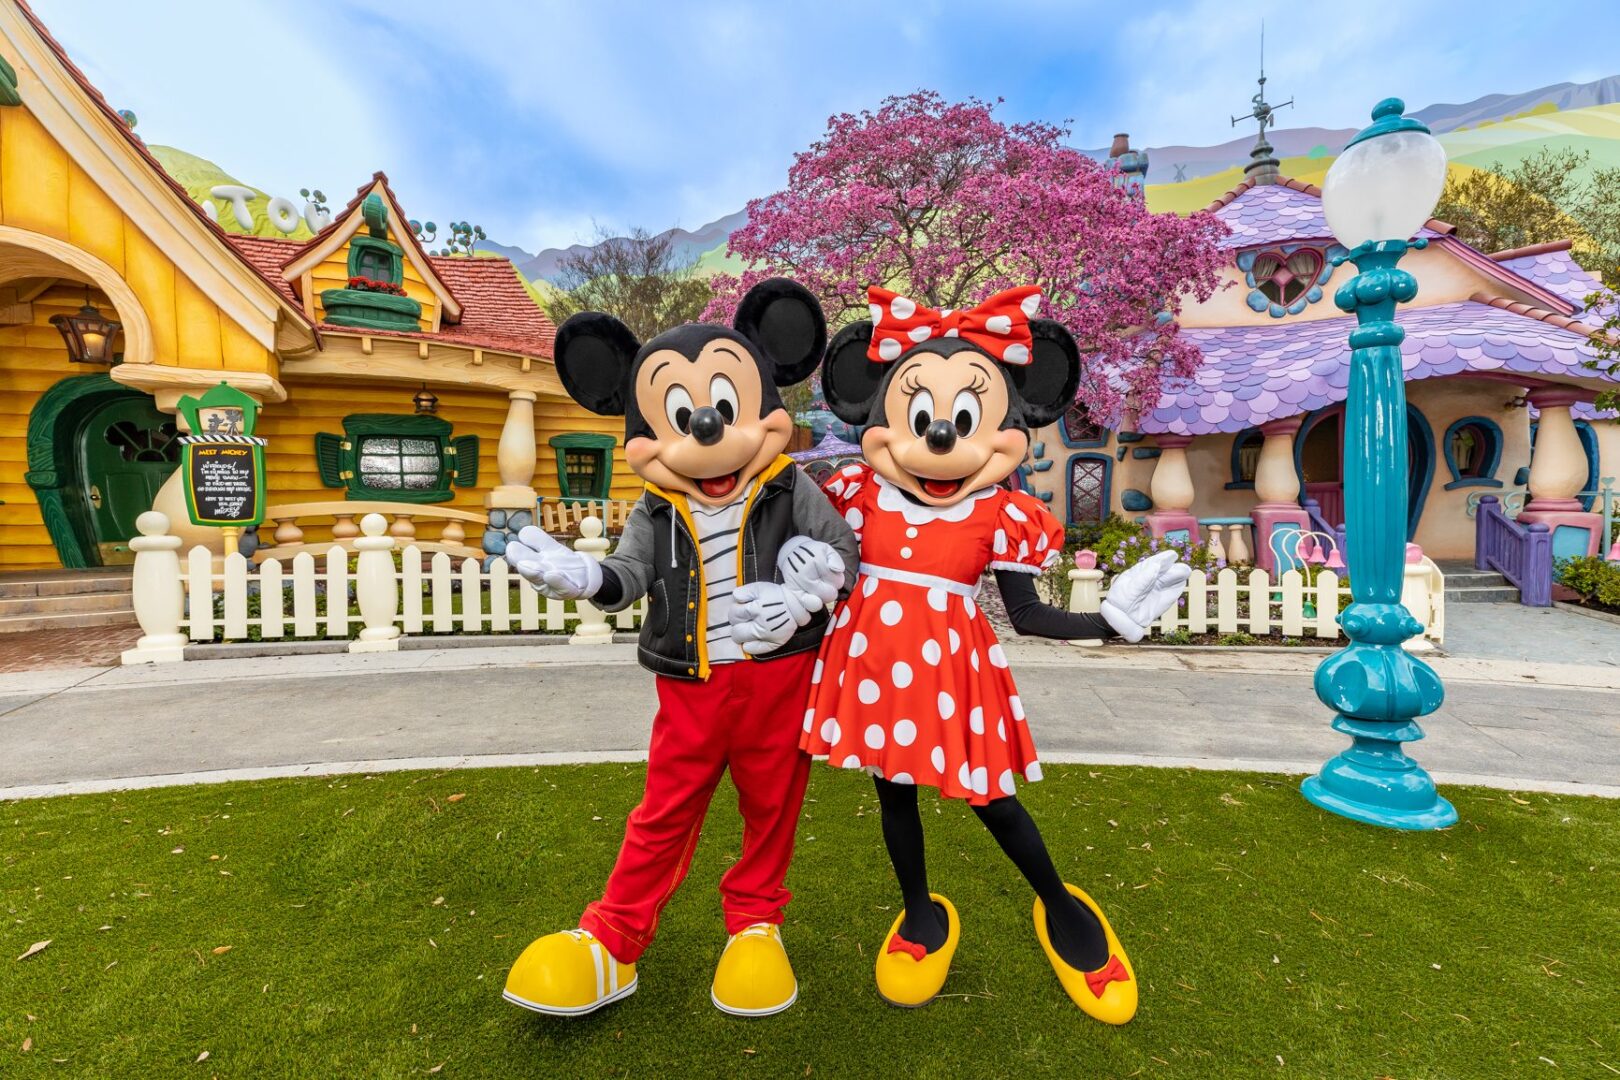 Reimagined Mickey’s Toontown Reopens to Interactive Play for Families and Young Children